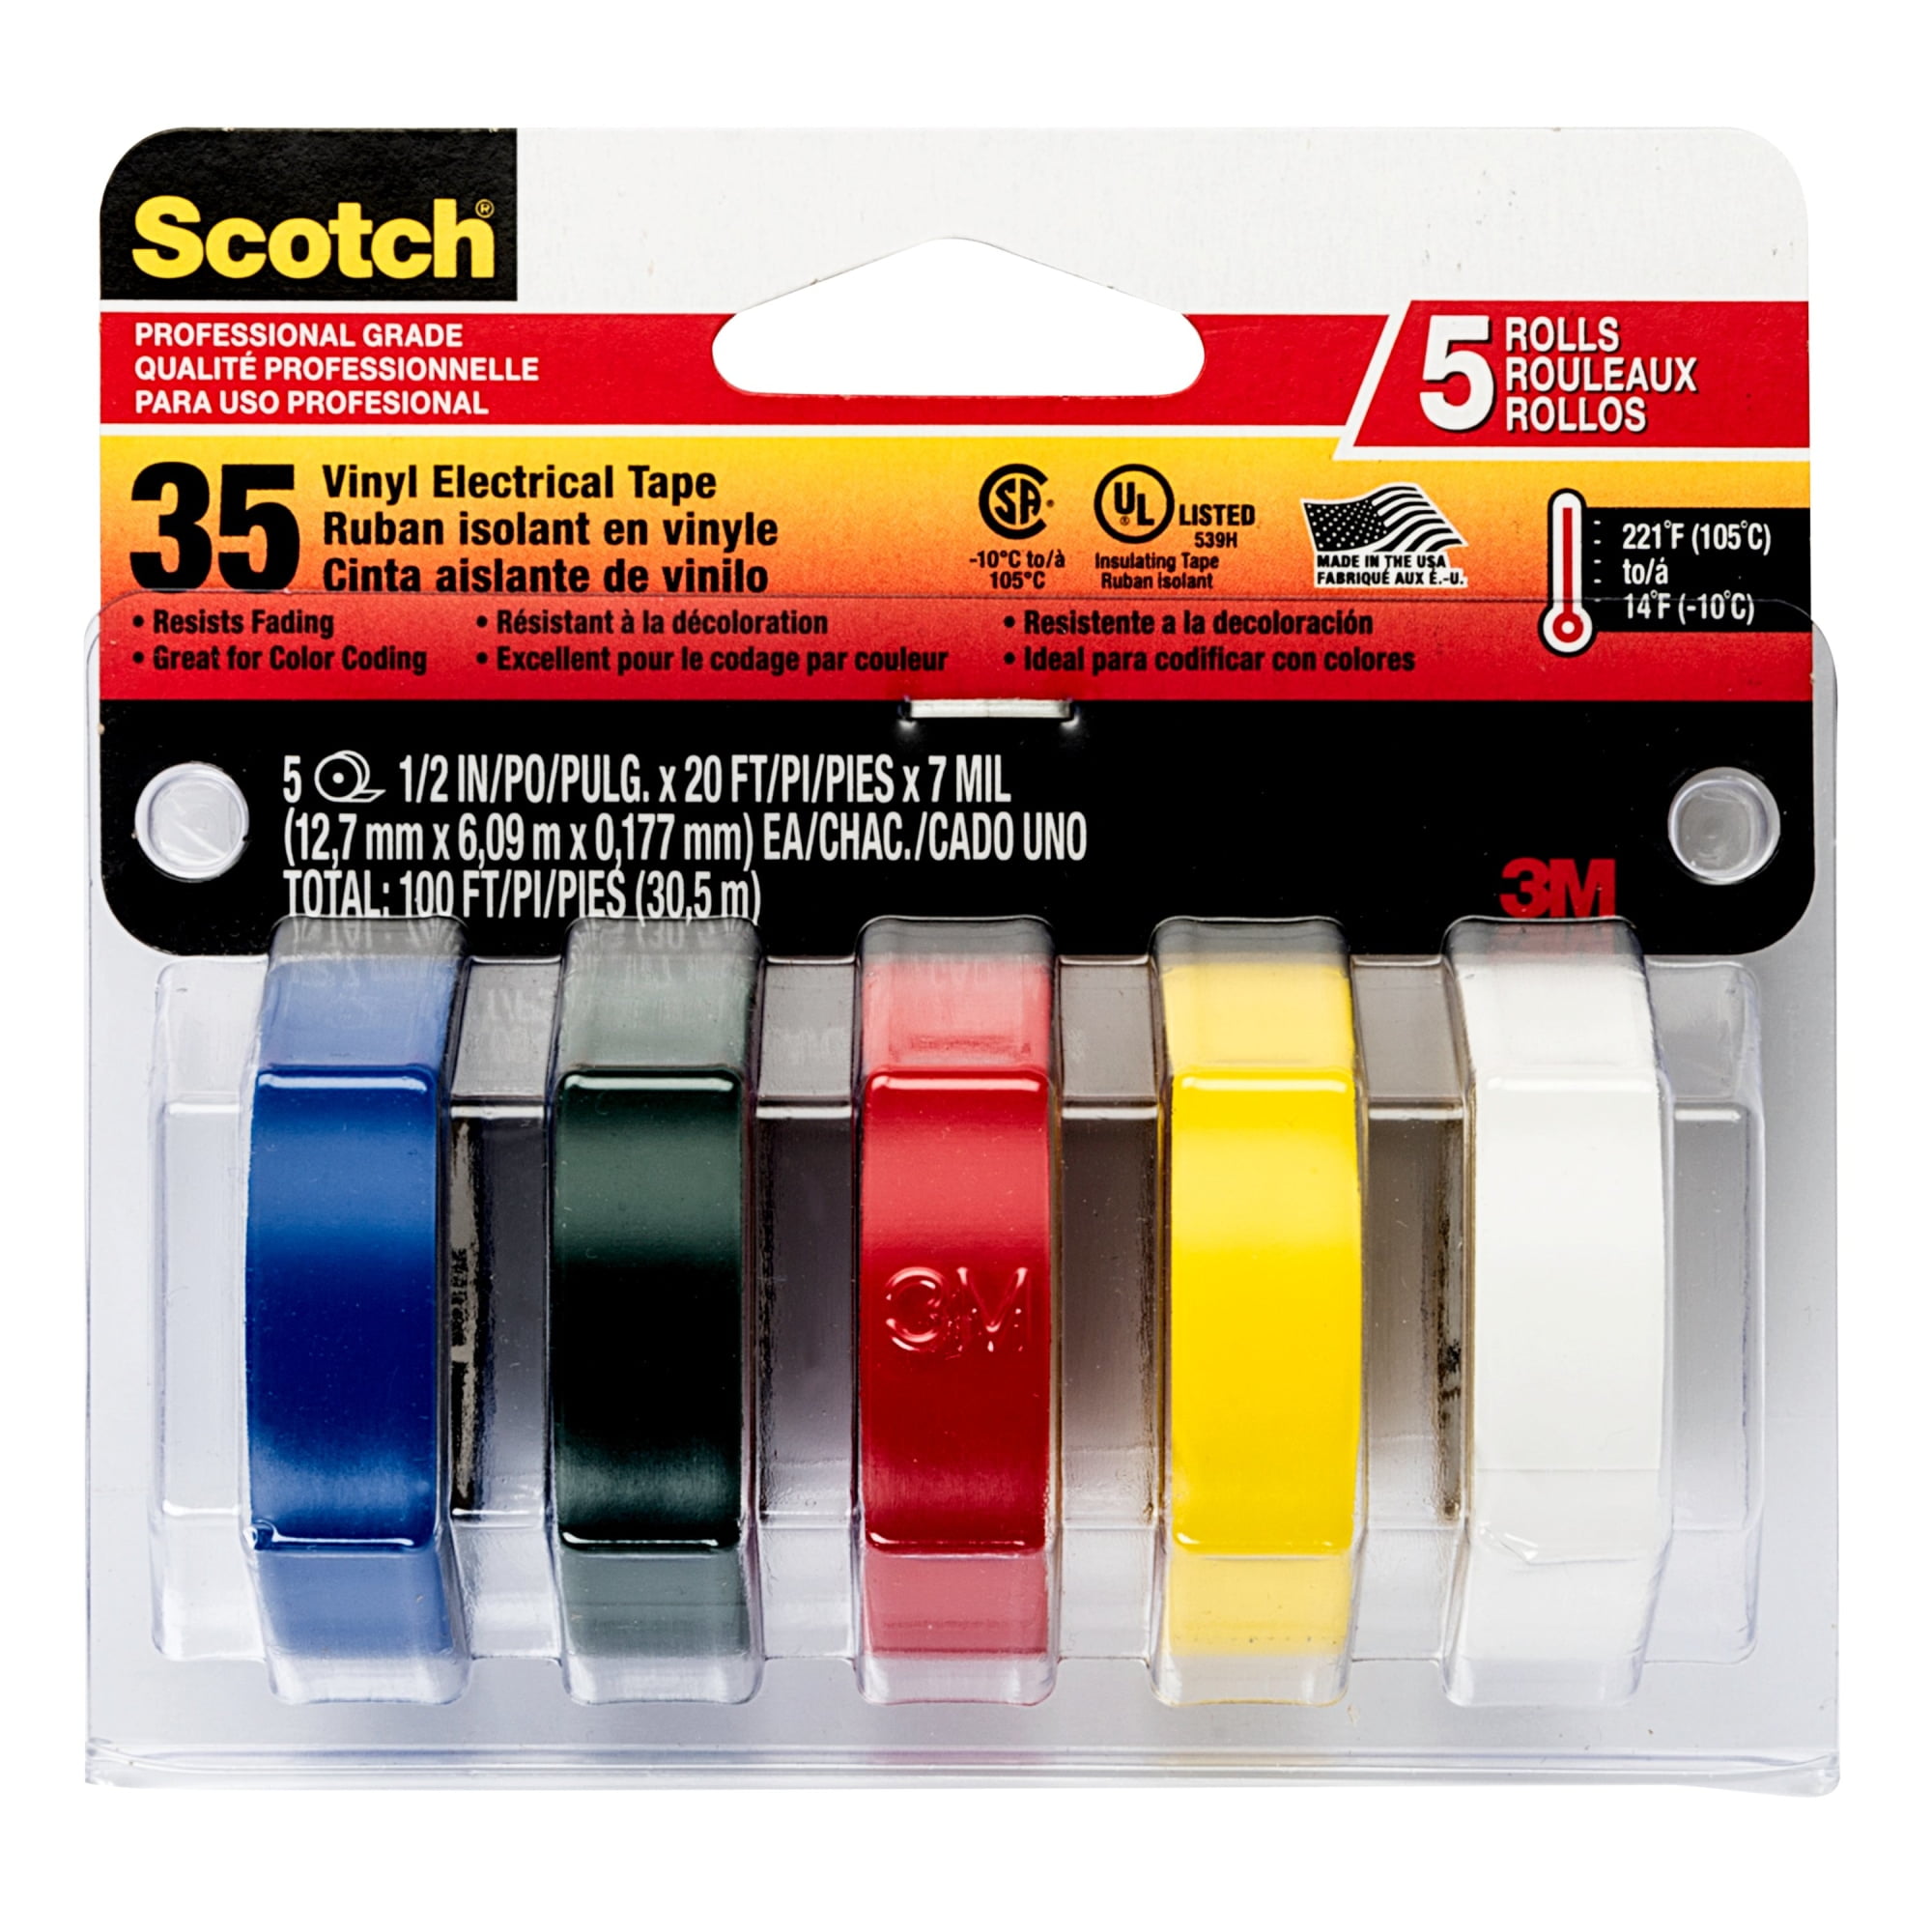 Scotch 10457DS 616241993522 35 Electrical Tape, Multi-Color Value Pack, 5  Rolls, 1 Pack, Multicolor, 5 Count 